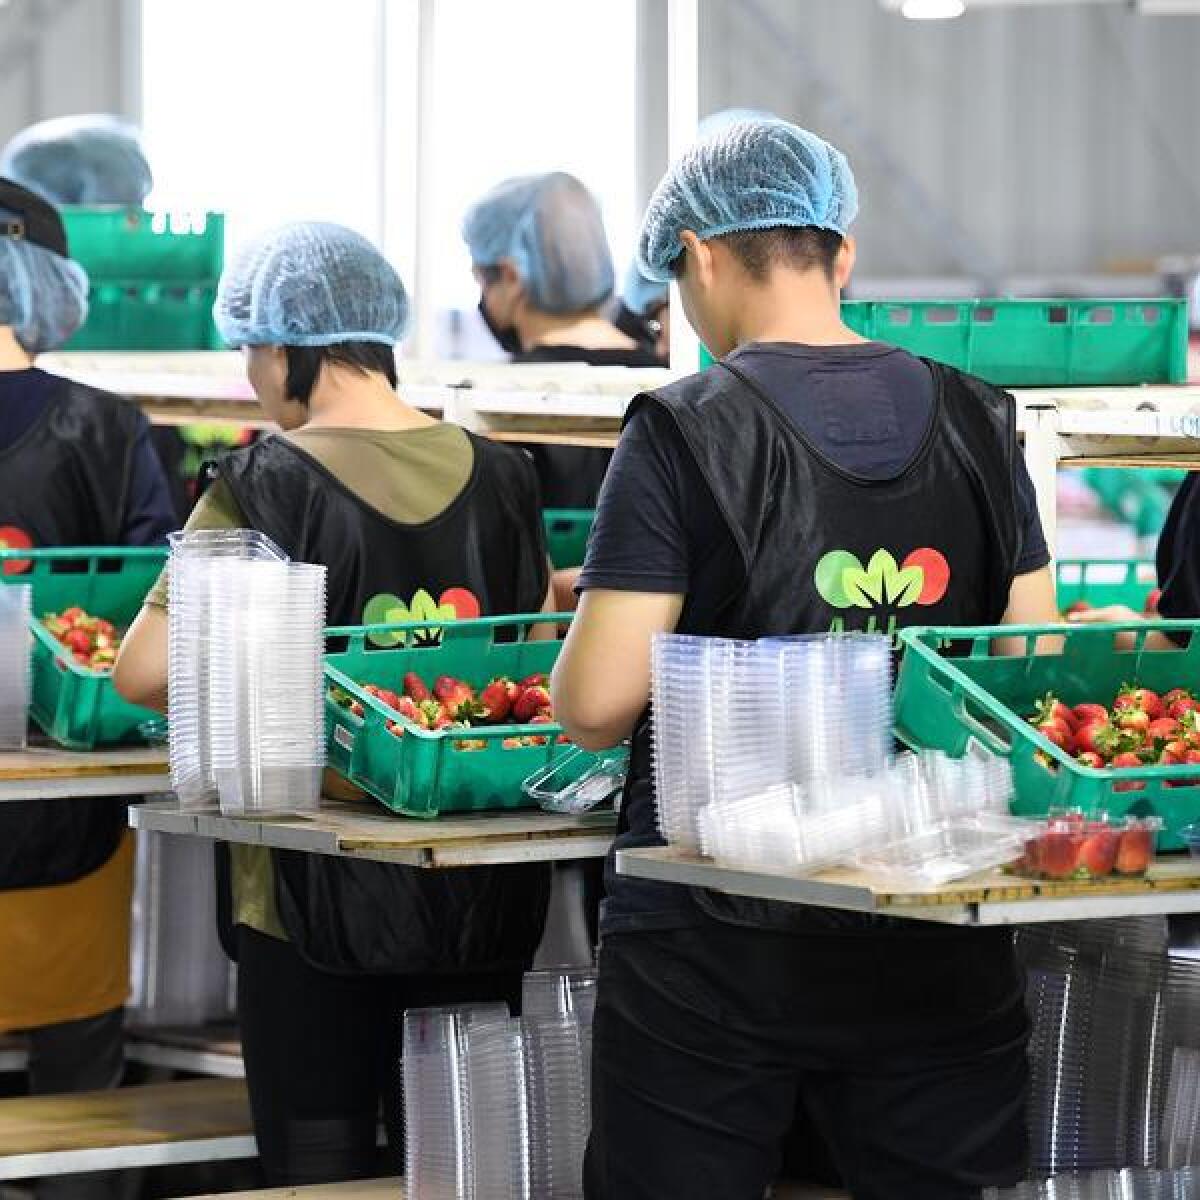 Workers pack punnets of strawberries at a strawberry farm in Qld